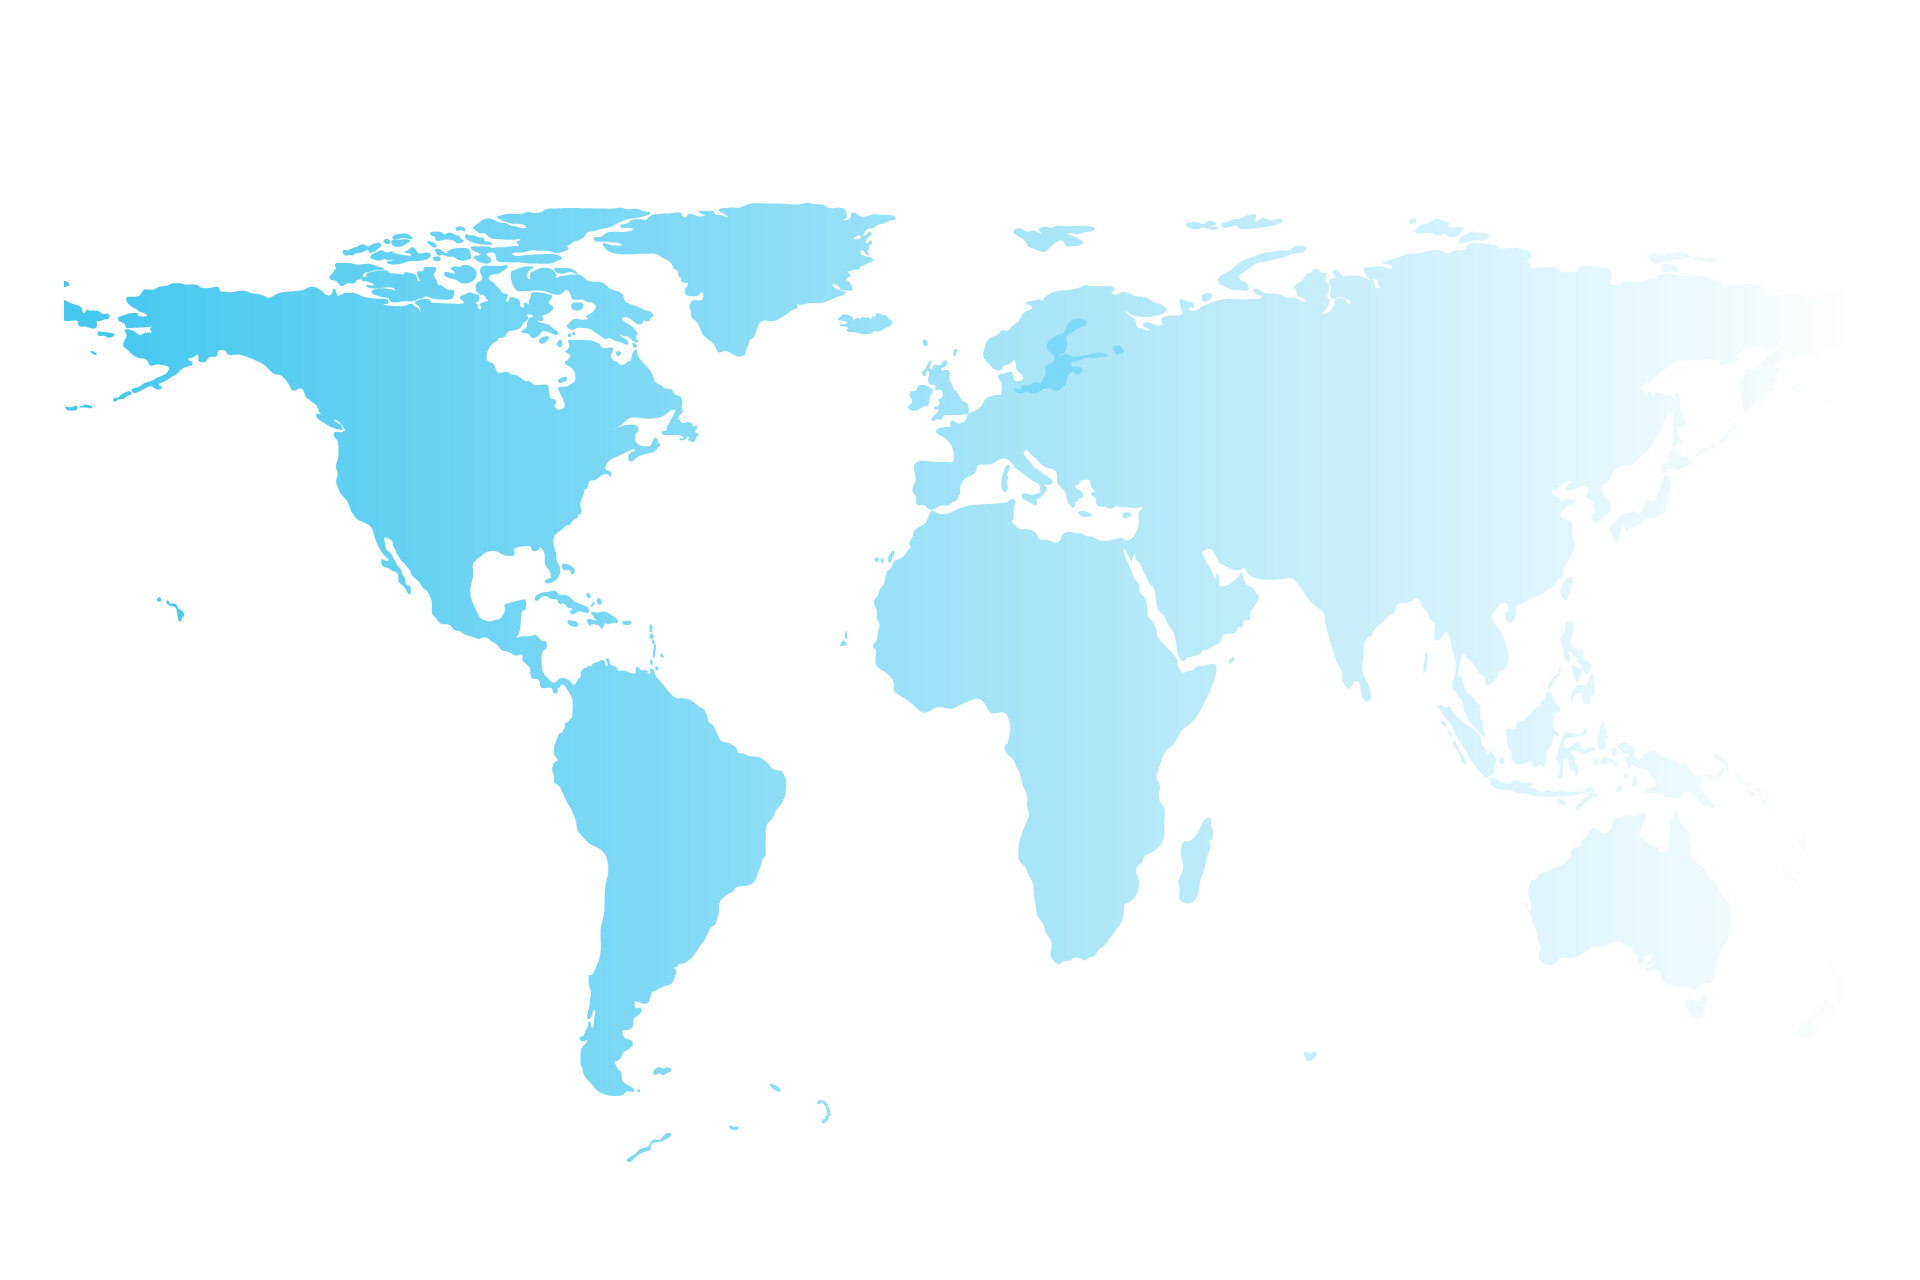 A blue world map on a green background.